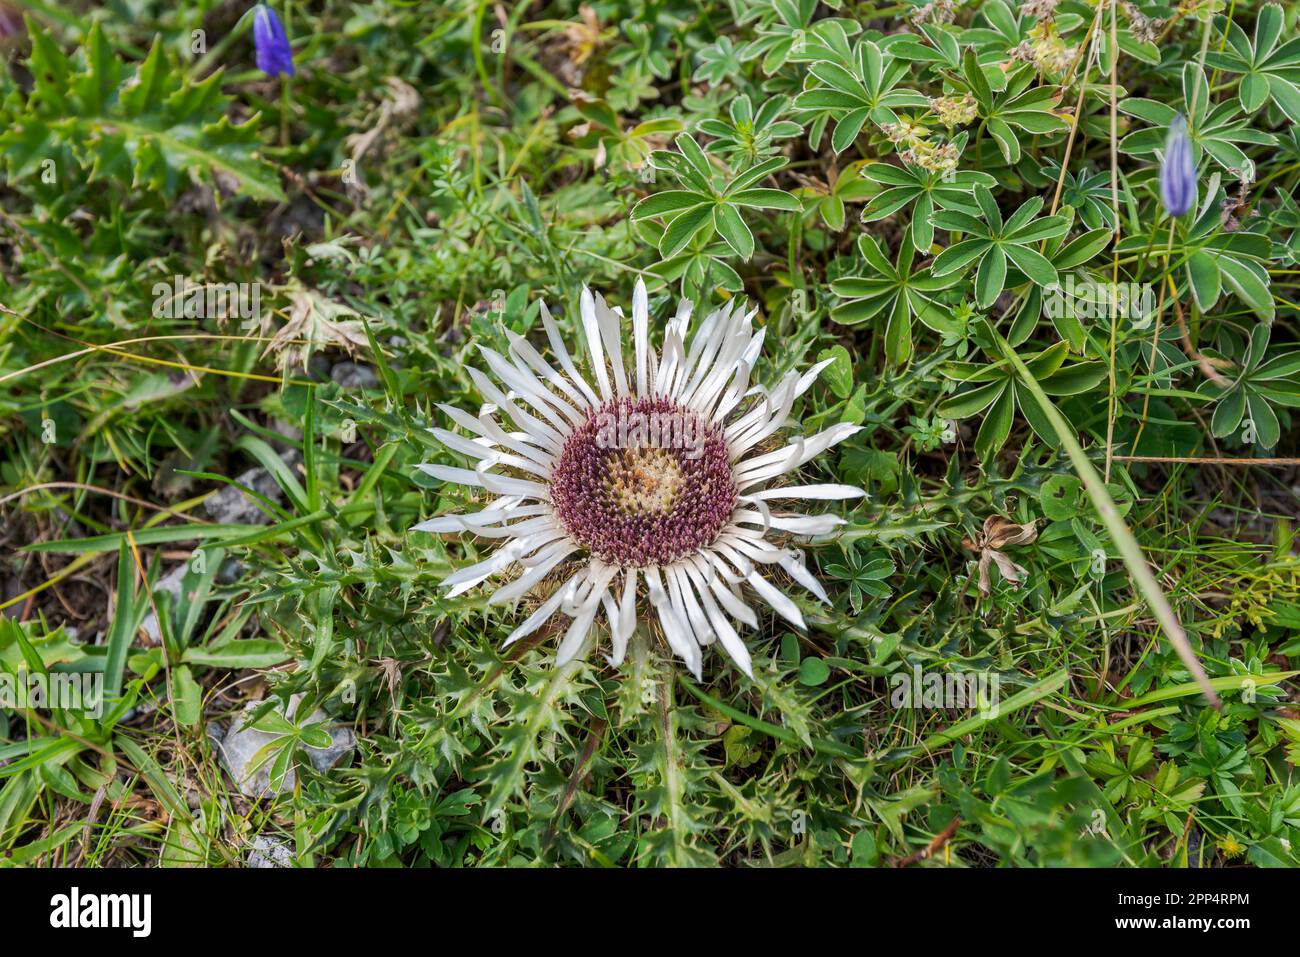 Carlina acaulis, the stemless carline thistle. Photo taken in the Mieming Range, by de Seebensee lake, State of Tyrol, Austria. Stock Photo